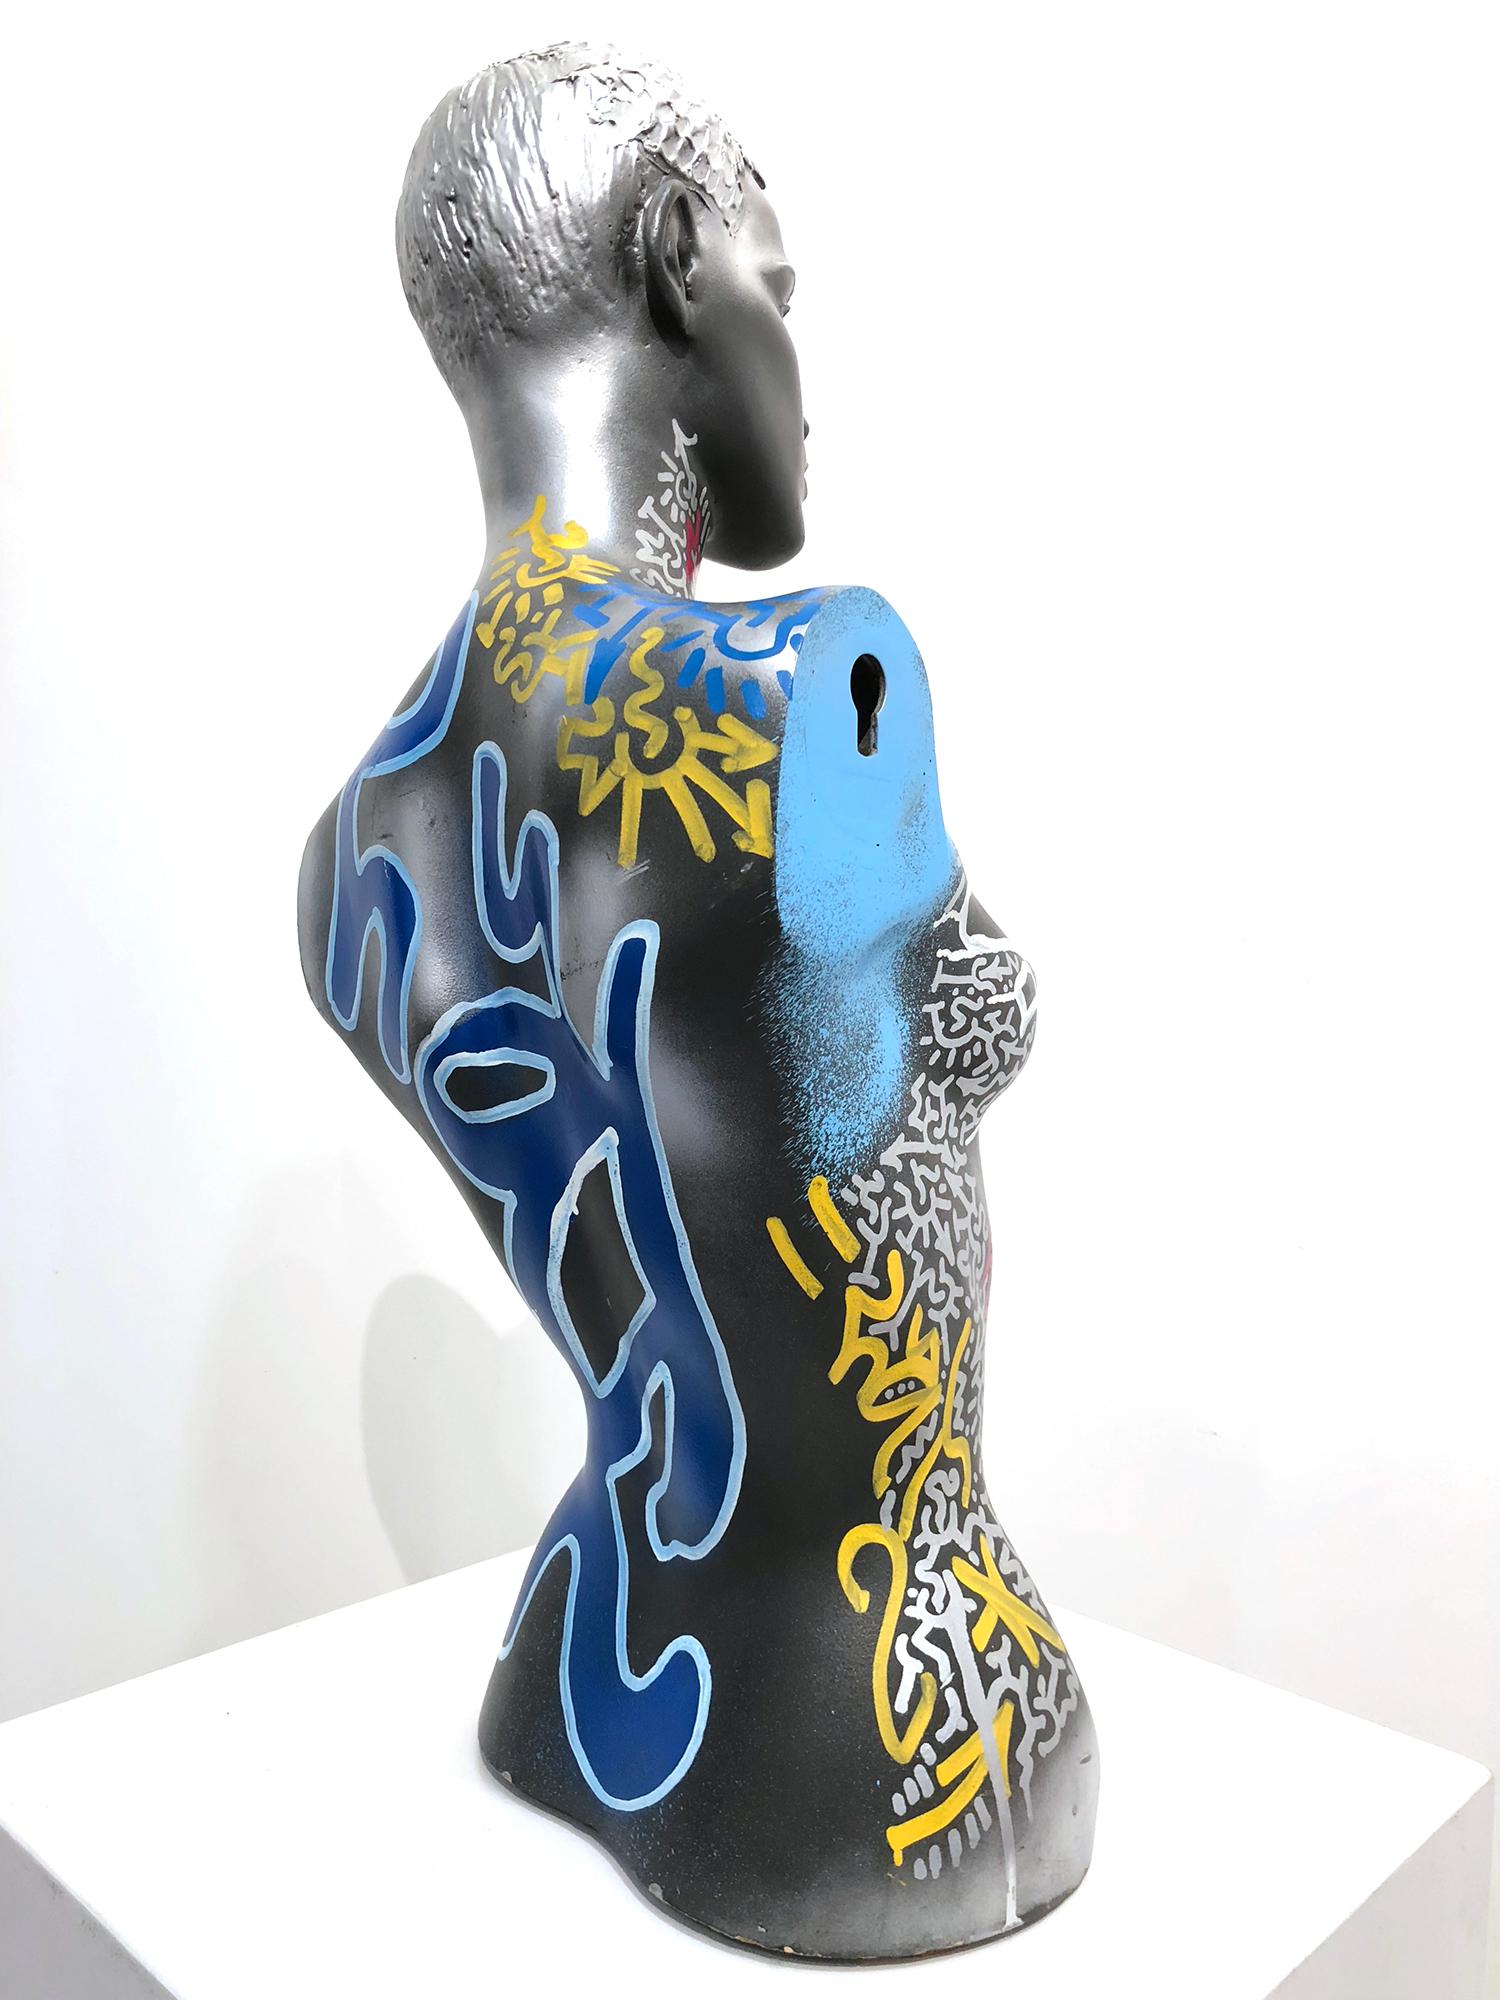 A beautiful street art, abstract Mannequin Bust decorated by artist Angel Ortiz. Here we find this stylish bust figure with the artist signature tag along with a figure of a cat, flowers, and calligraphy.

Sculpture measures 29.5 x 14.5 x 9.5